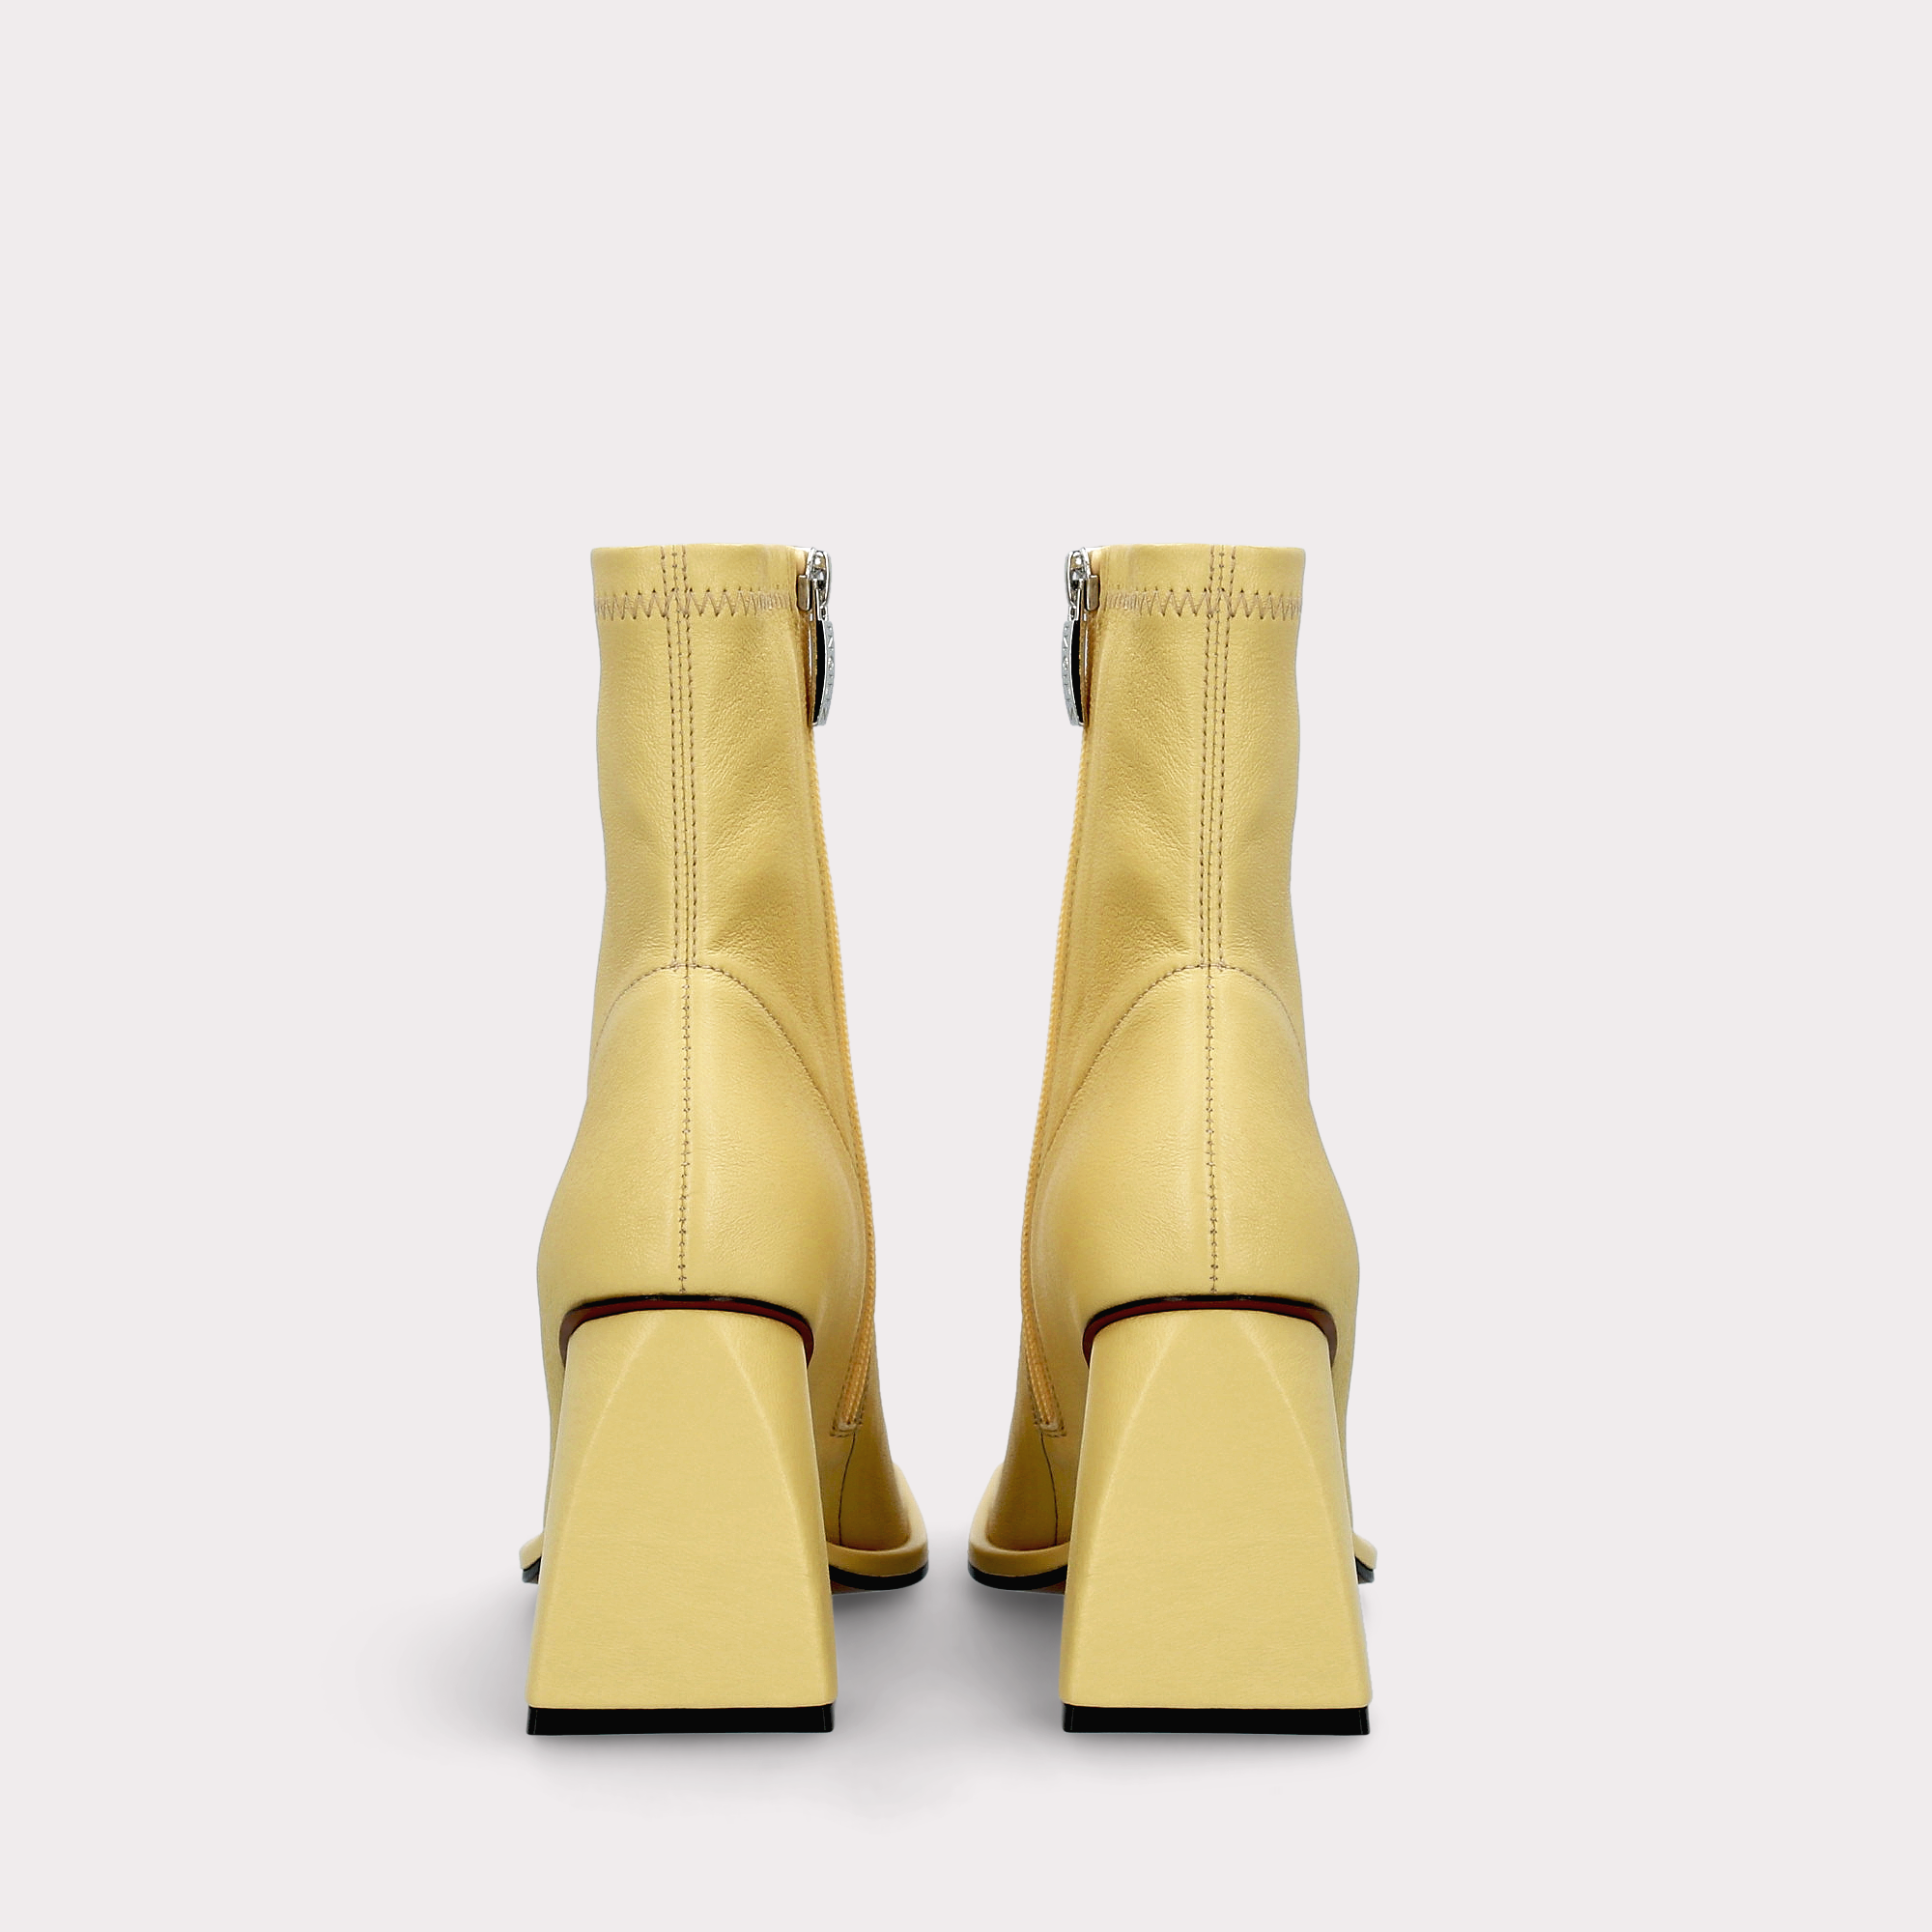 BRENTA 01 PASTEL YELLOW STRETCH LEATHER ANKLE BOOTS